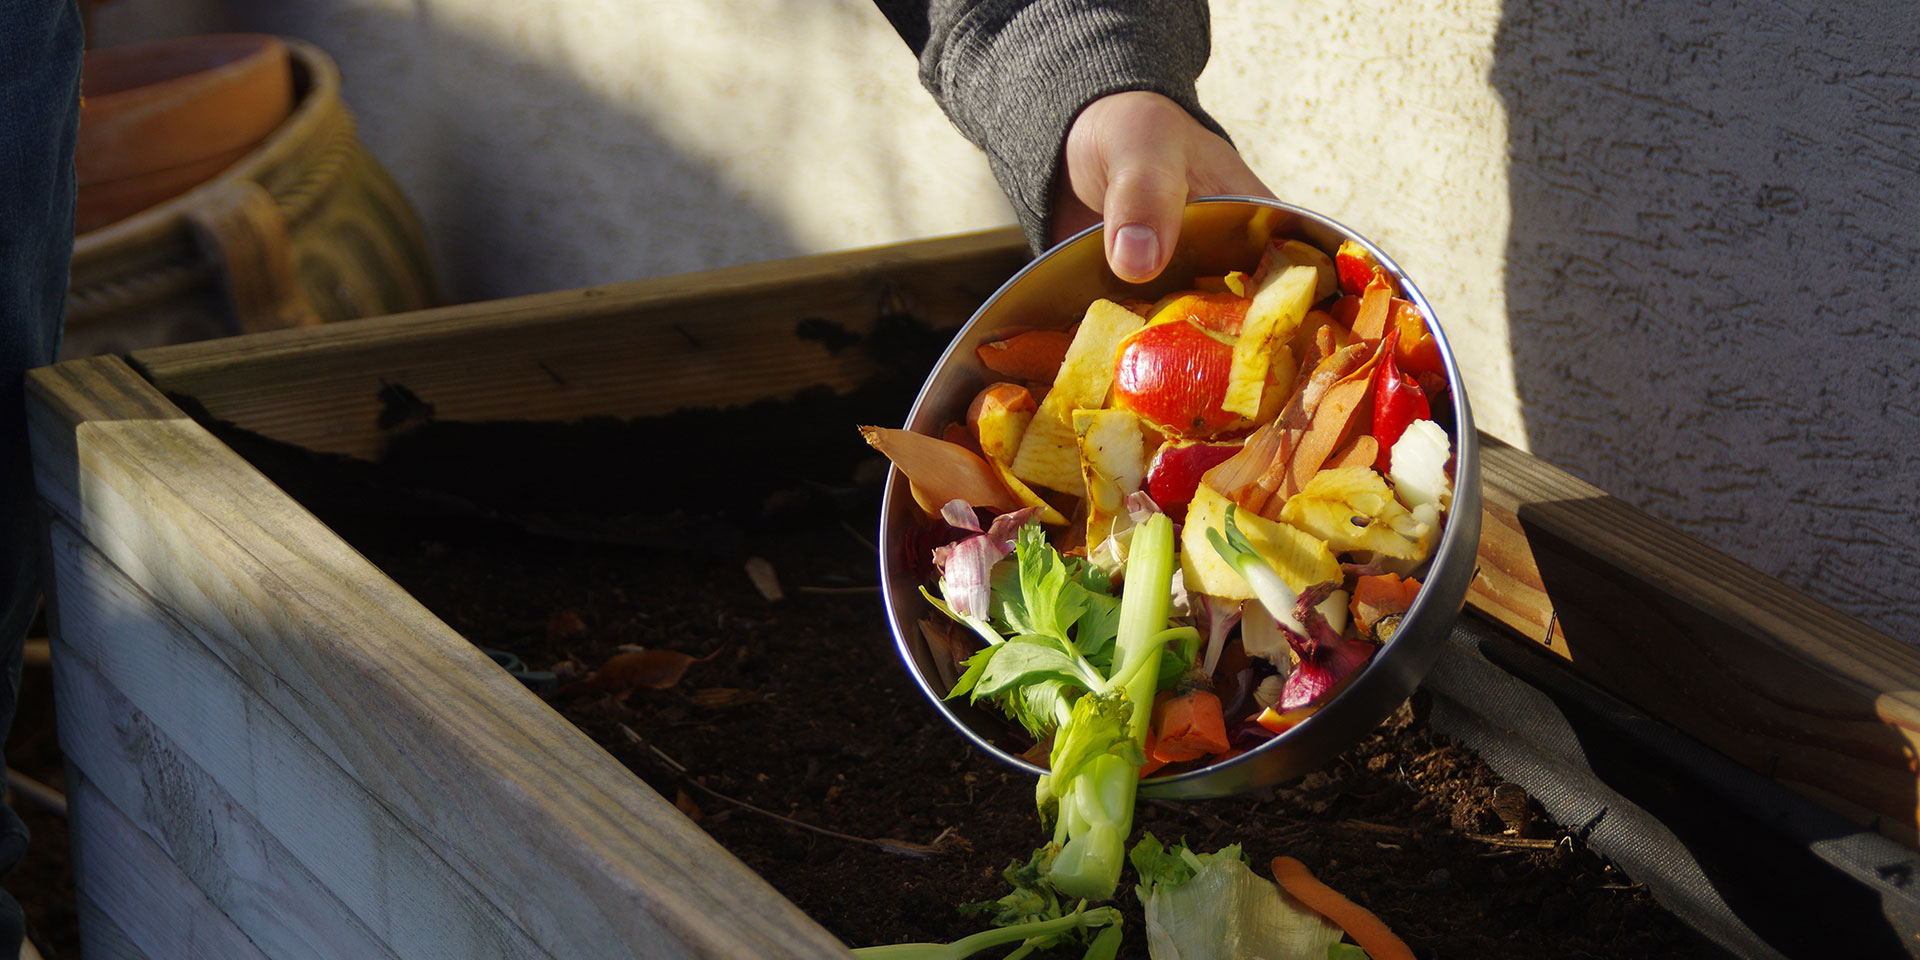 how to compost - tips from an expert